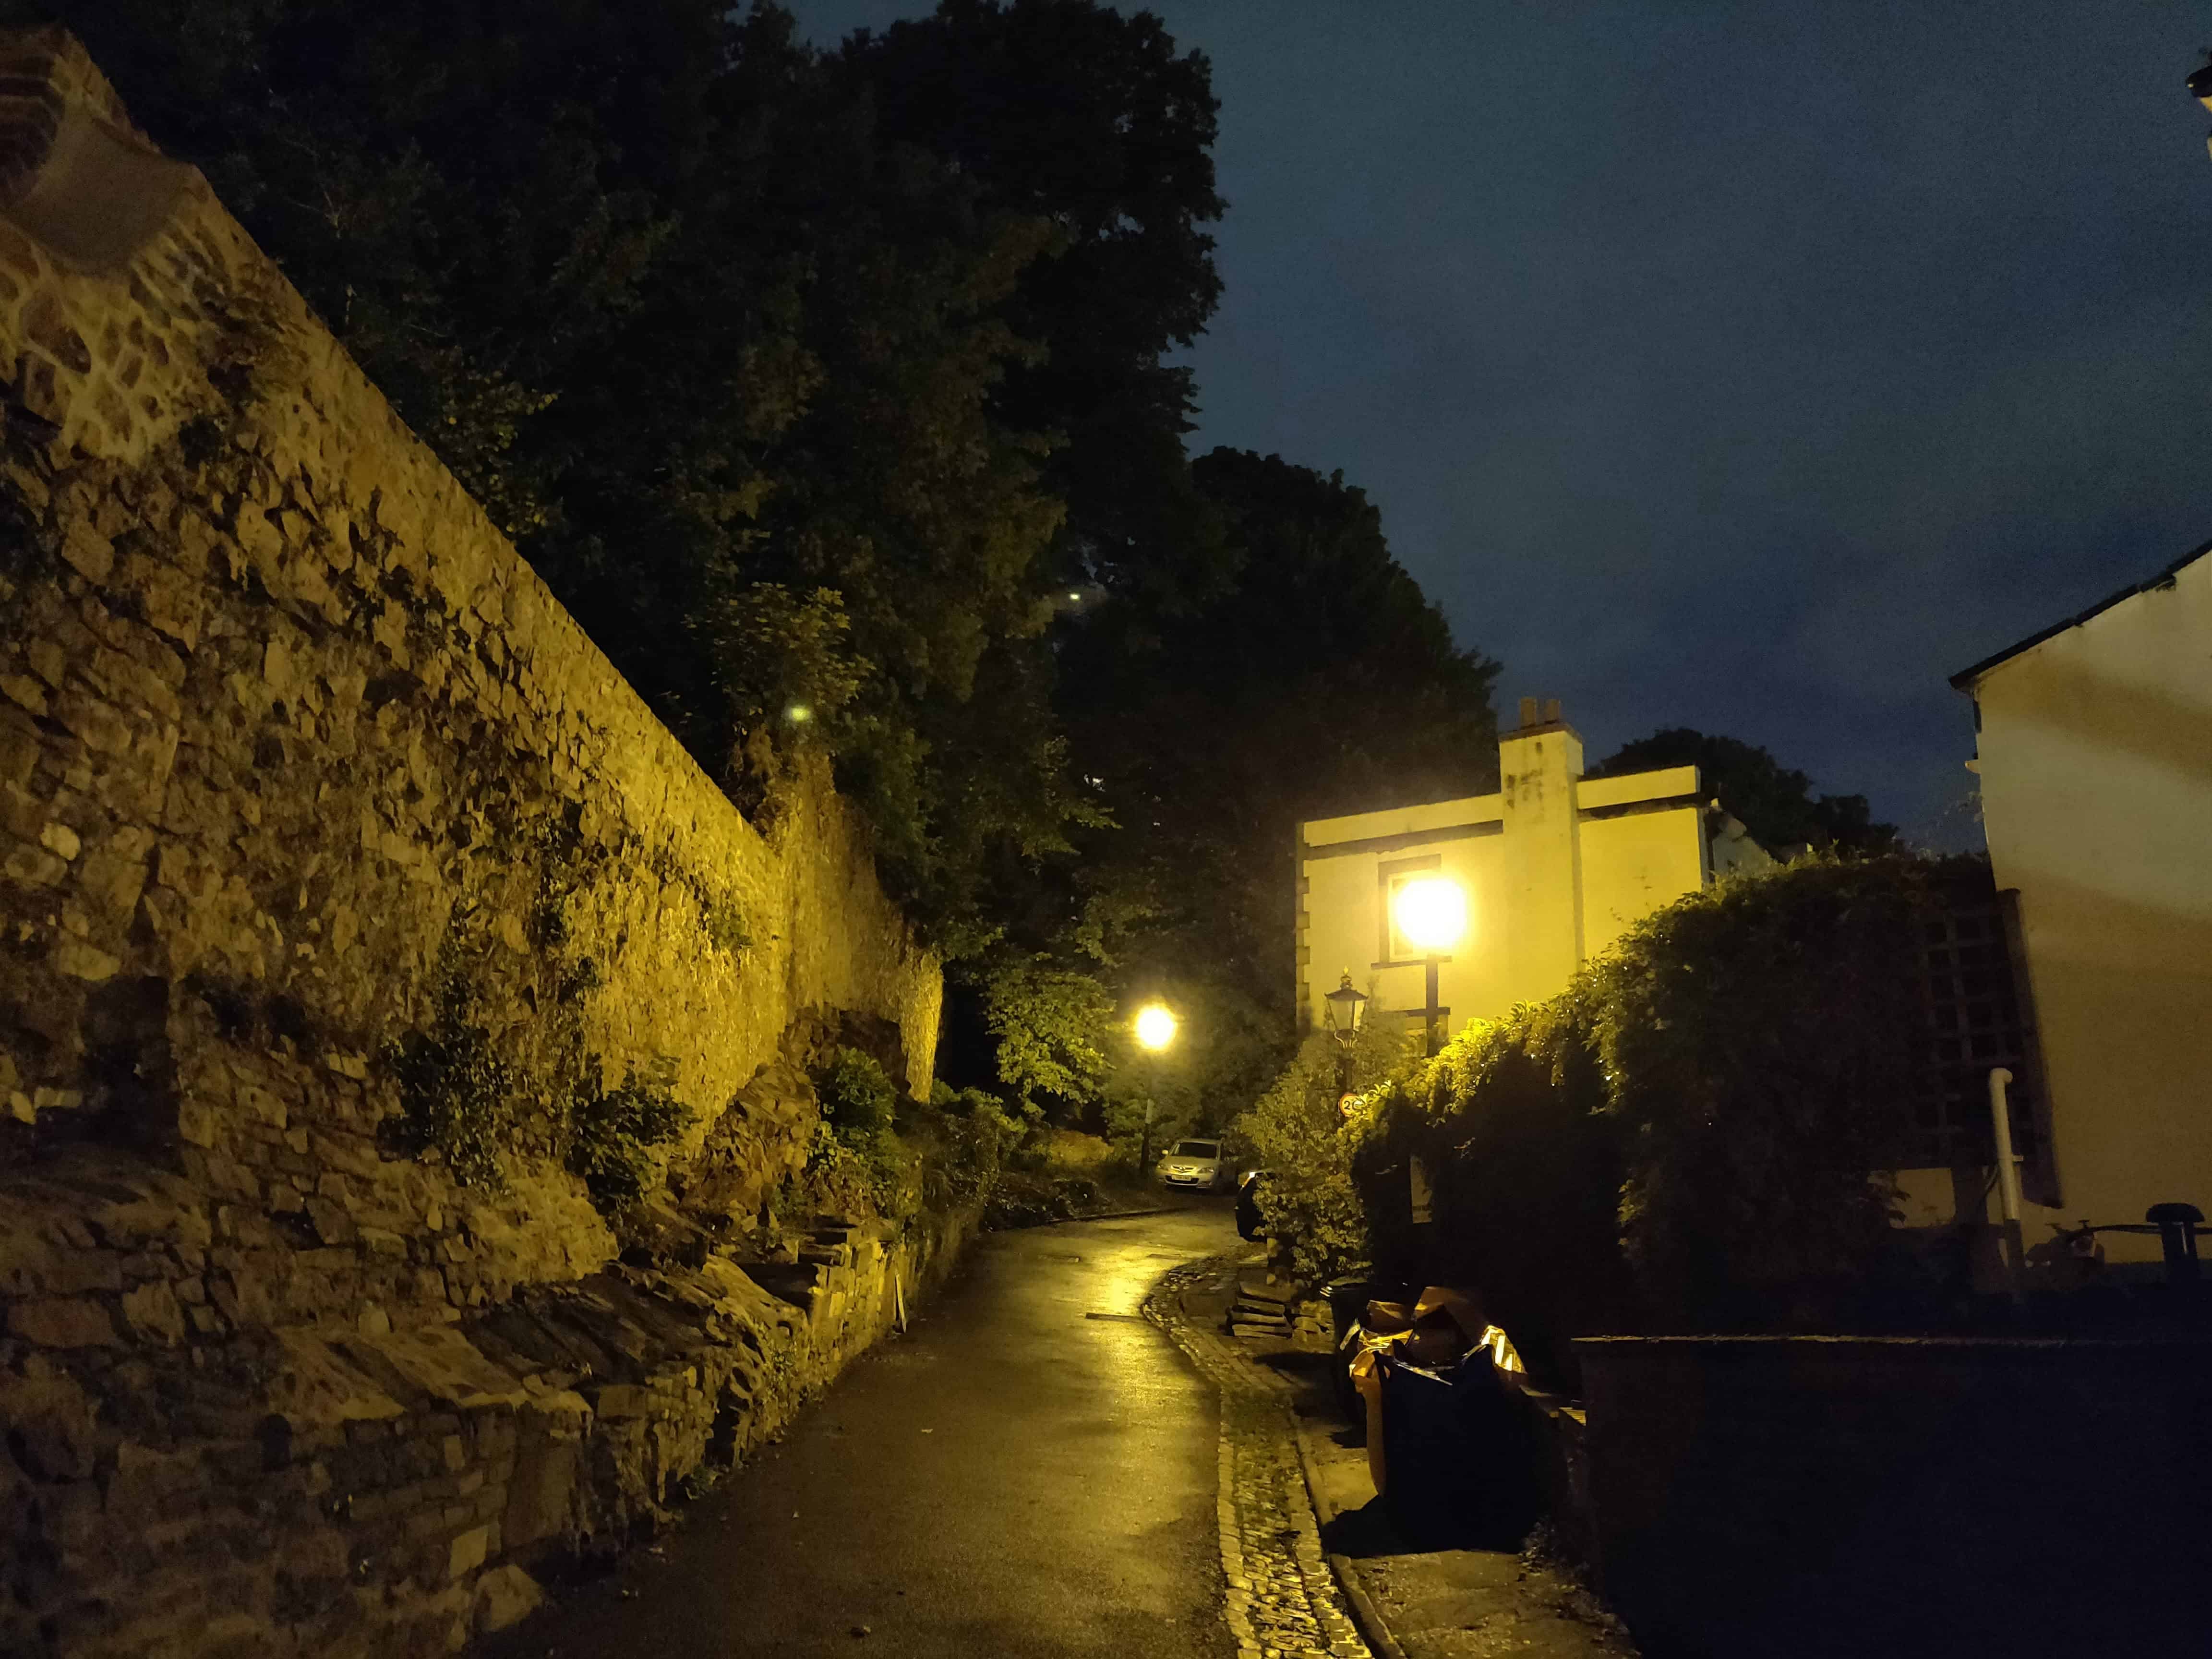 Alleyway at night, with a stone wall on one side and open on the other.